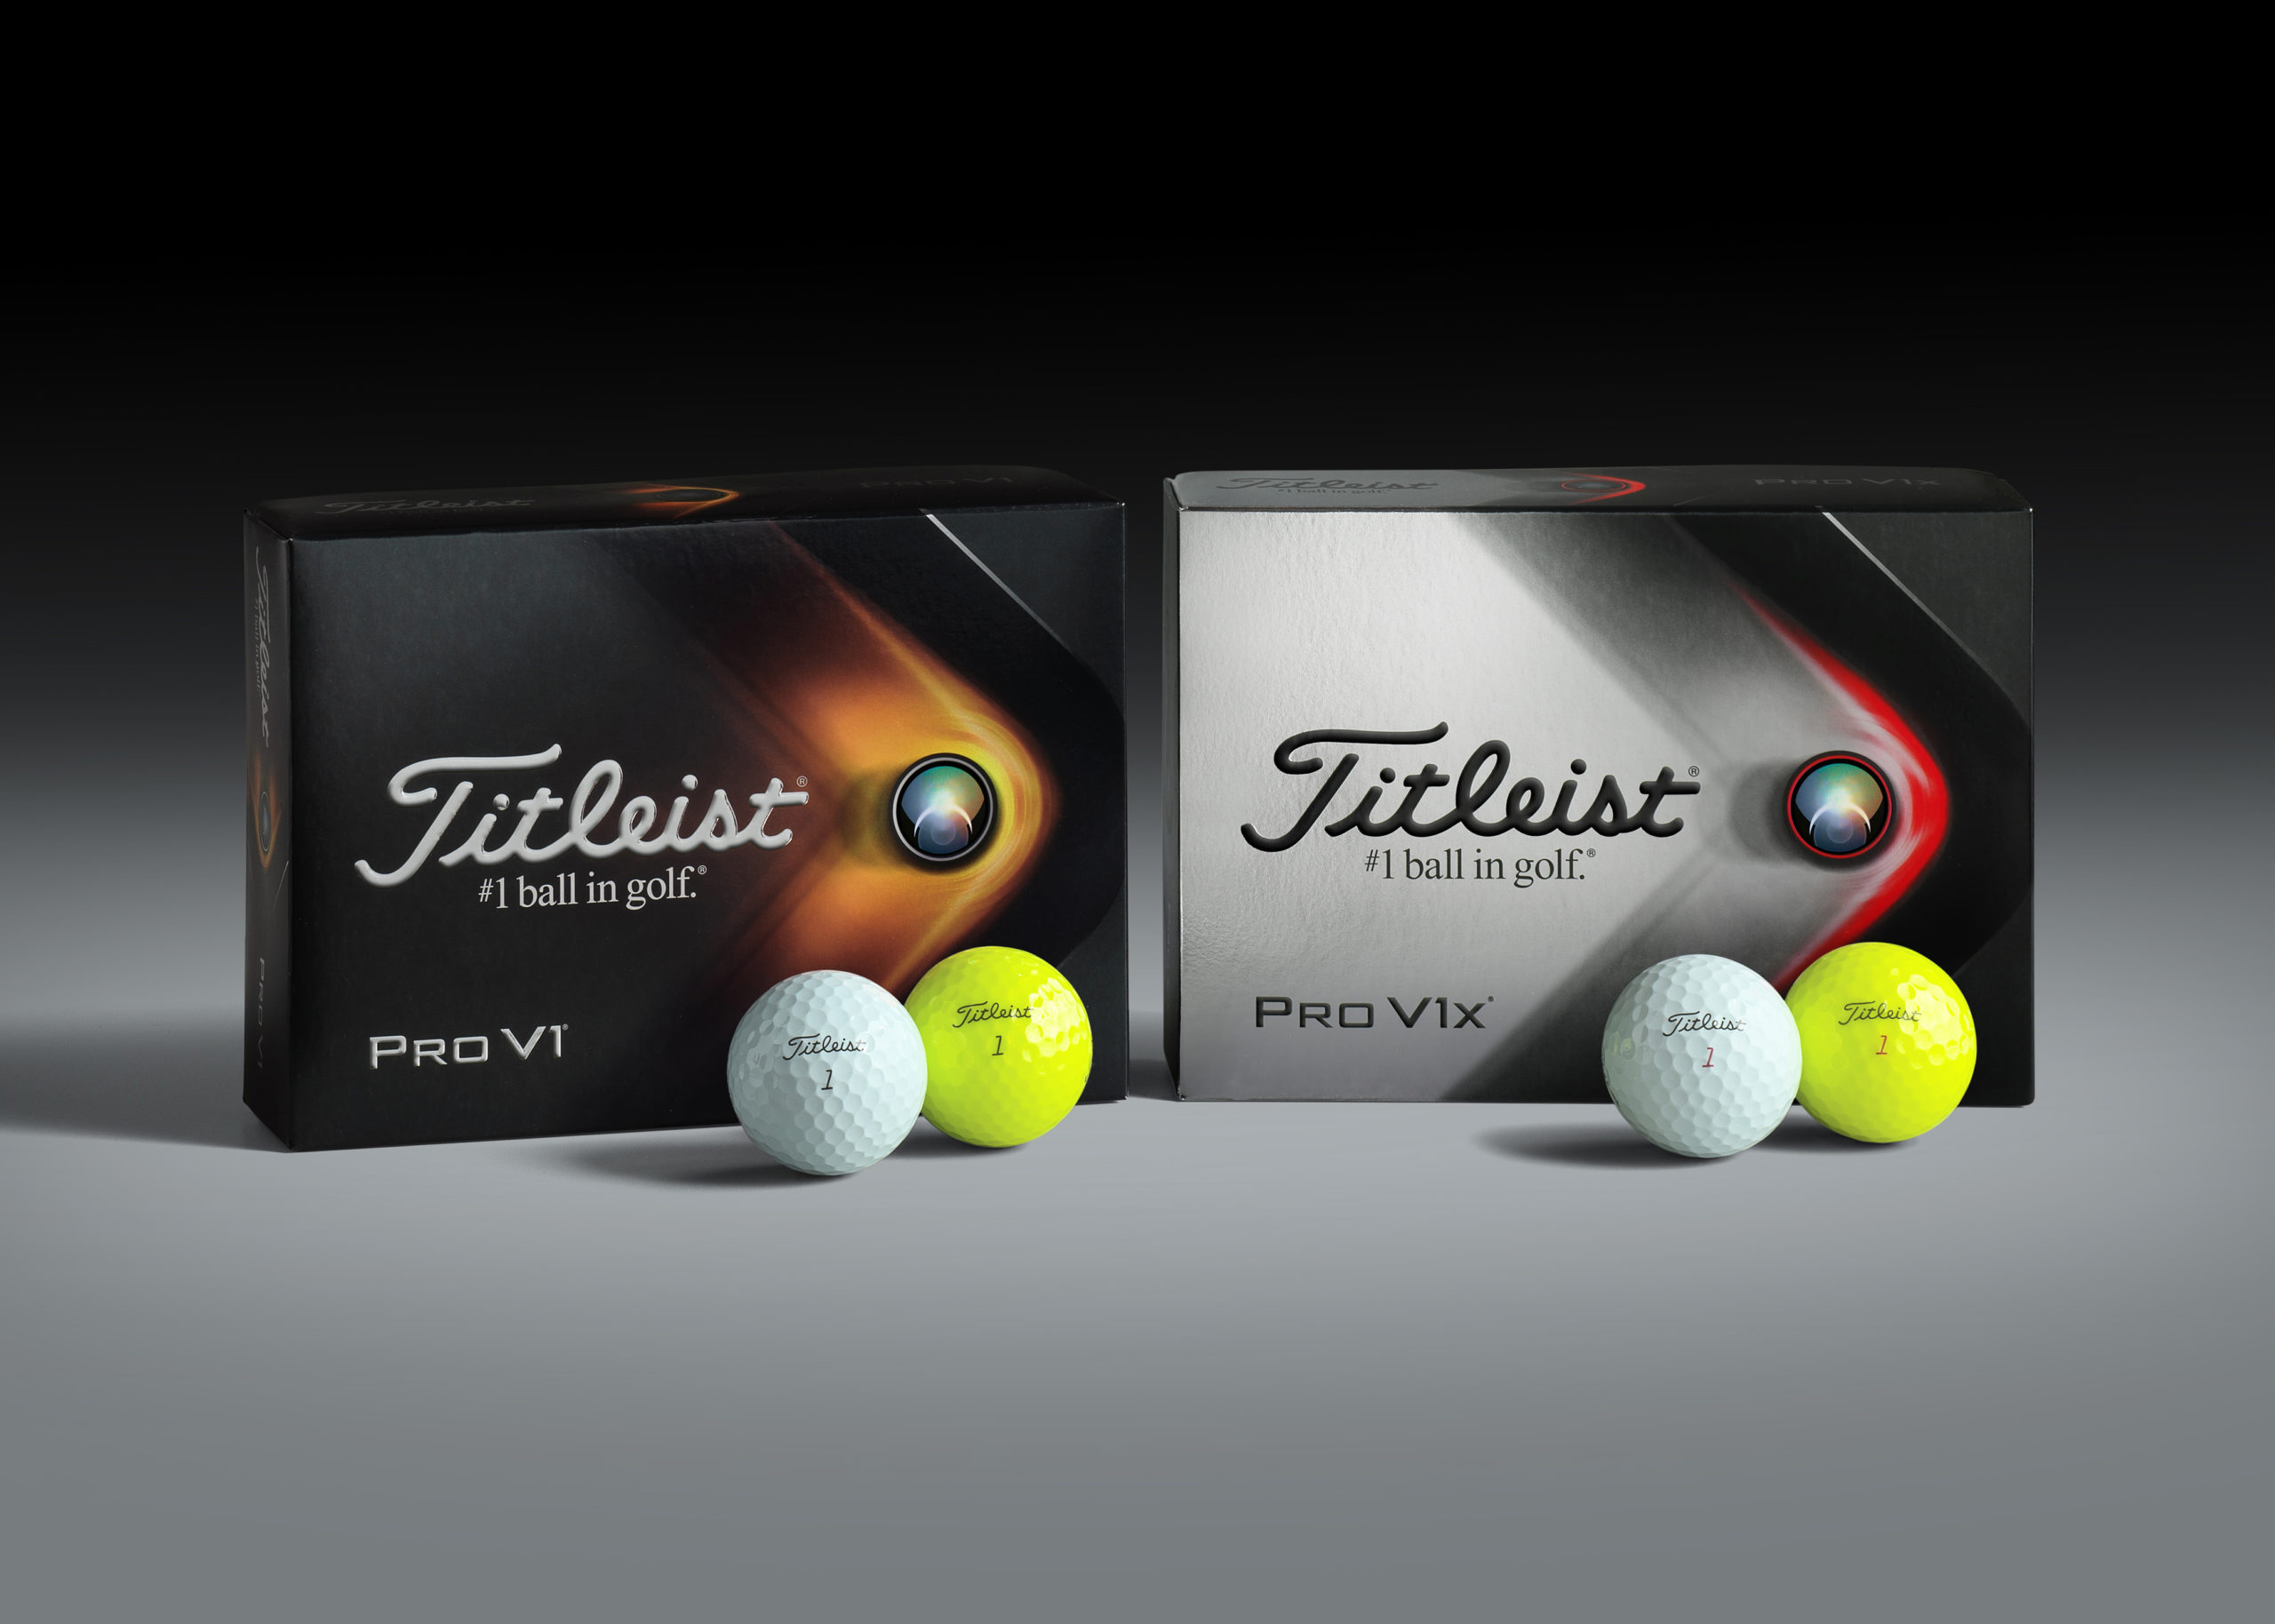 Picture of boxes of the Titleist Pro V1 golf balls from 2021